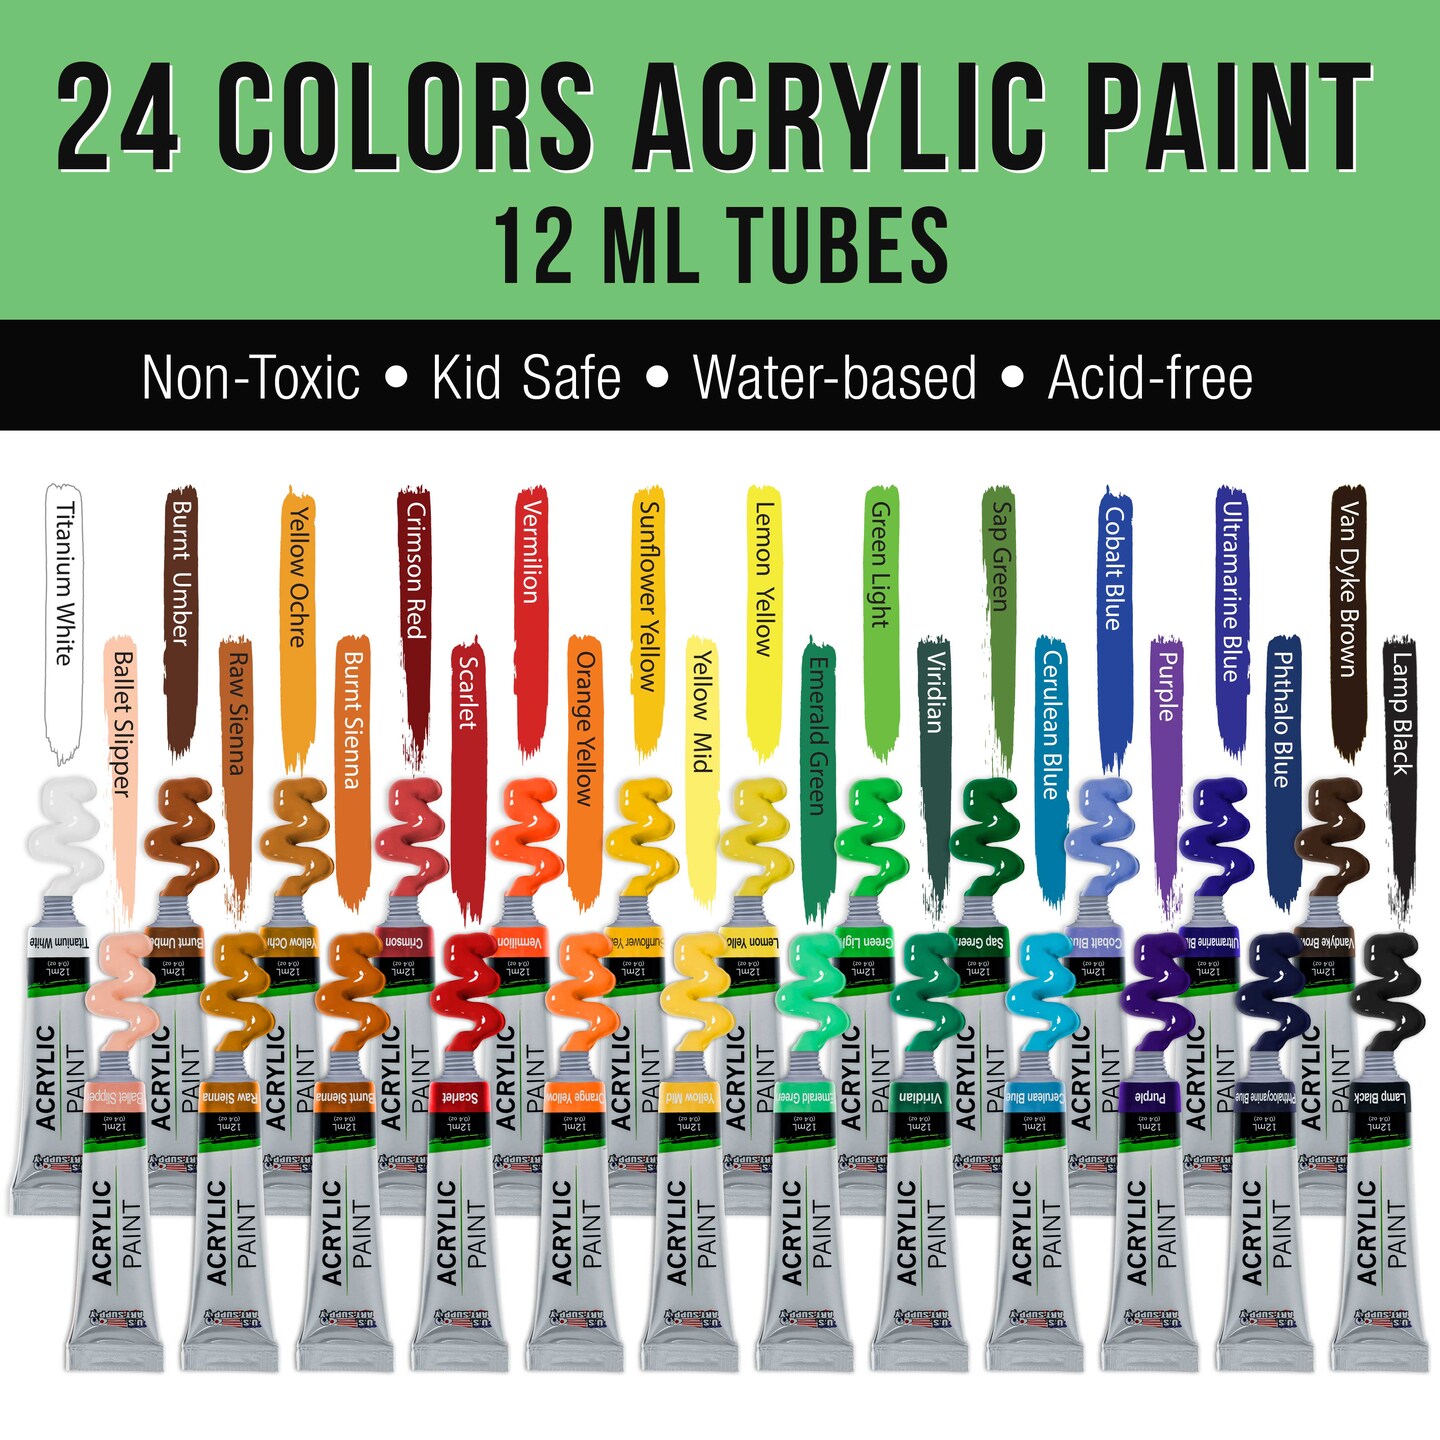 Complete Acrylic Paint Set, 36 Piece Professional Painting Set – Includes  Mini Easel, 6 Canvas, Paint Tray, Painting Knives, 10 Paintbrushes and More  – Perfect Gift for Artists.